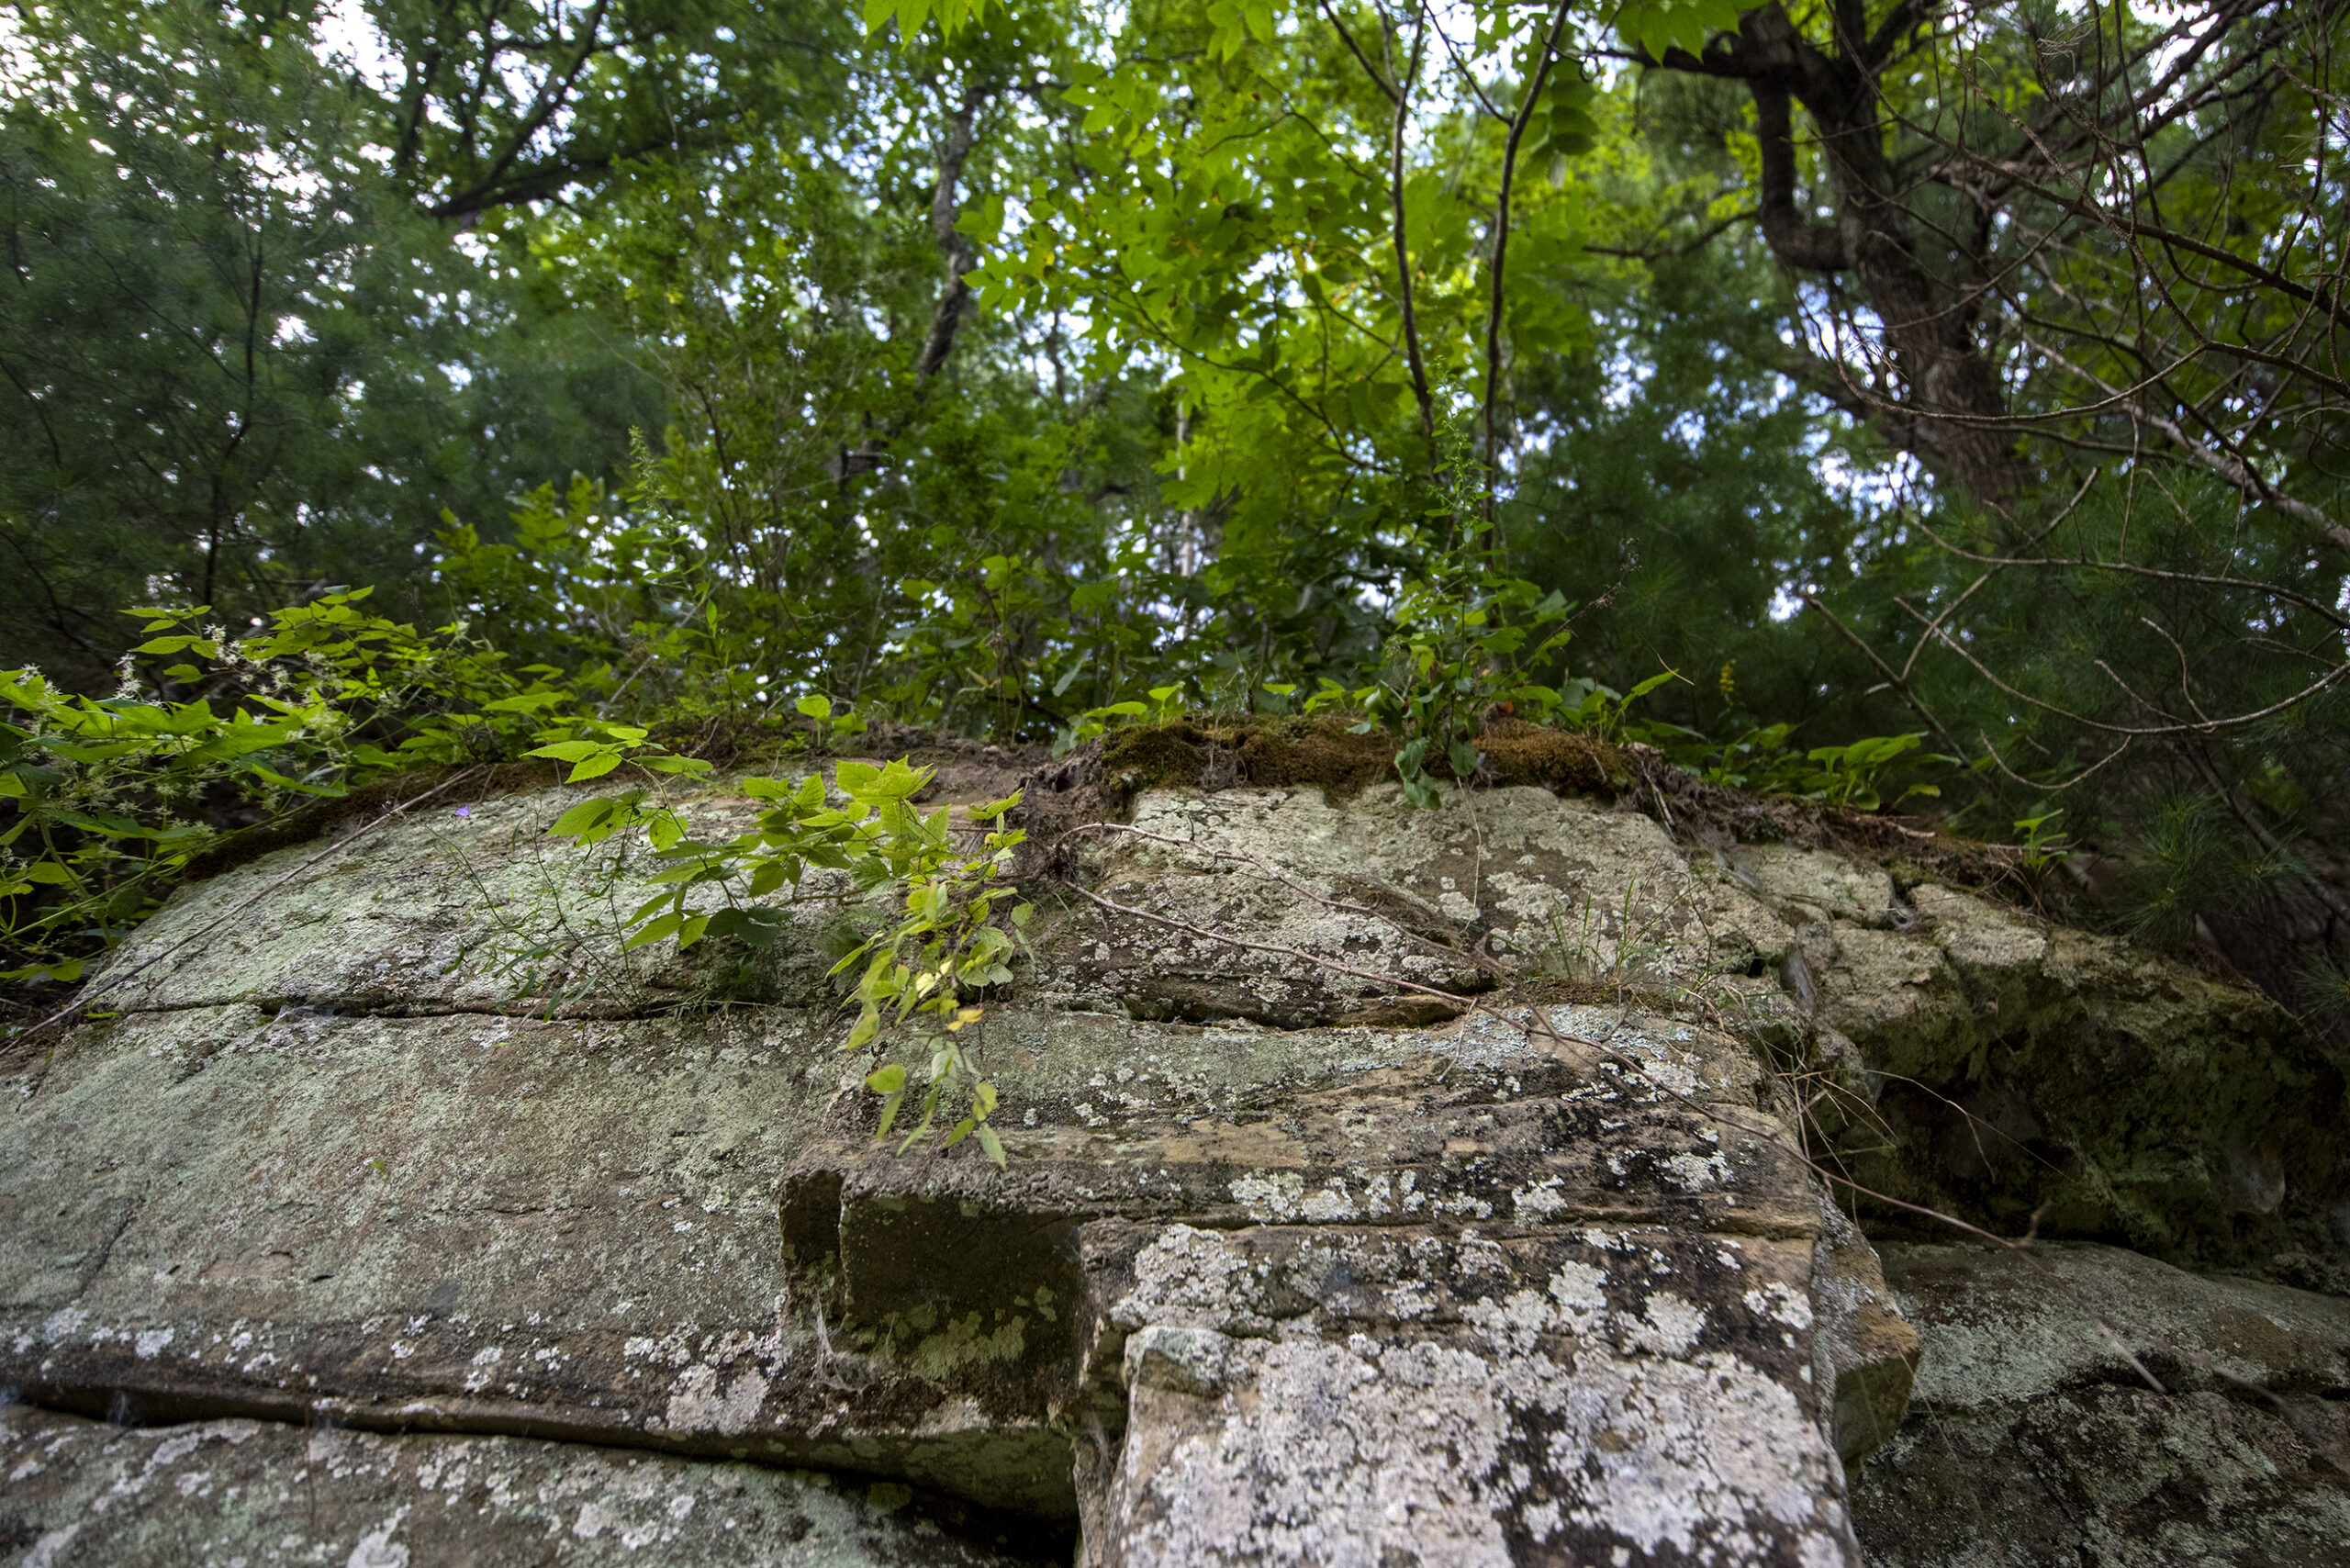 The edge of a rock is exposed as plants and trees grow on top.